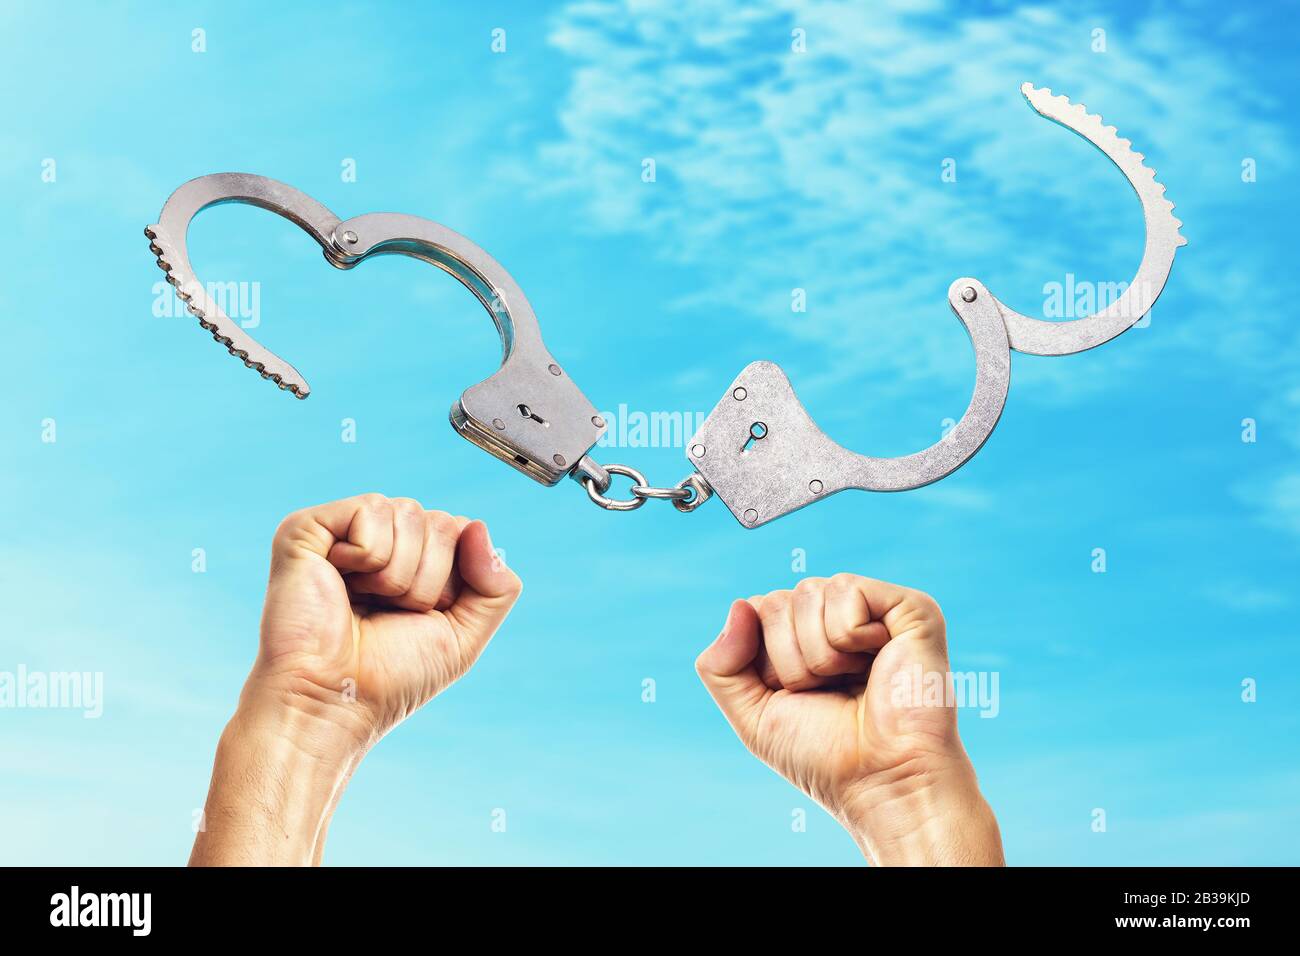 Open handcuffs and hands raised up amid the blue sky. Concept on the price of freedom Stock Photo